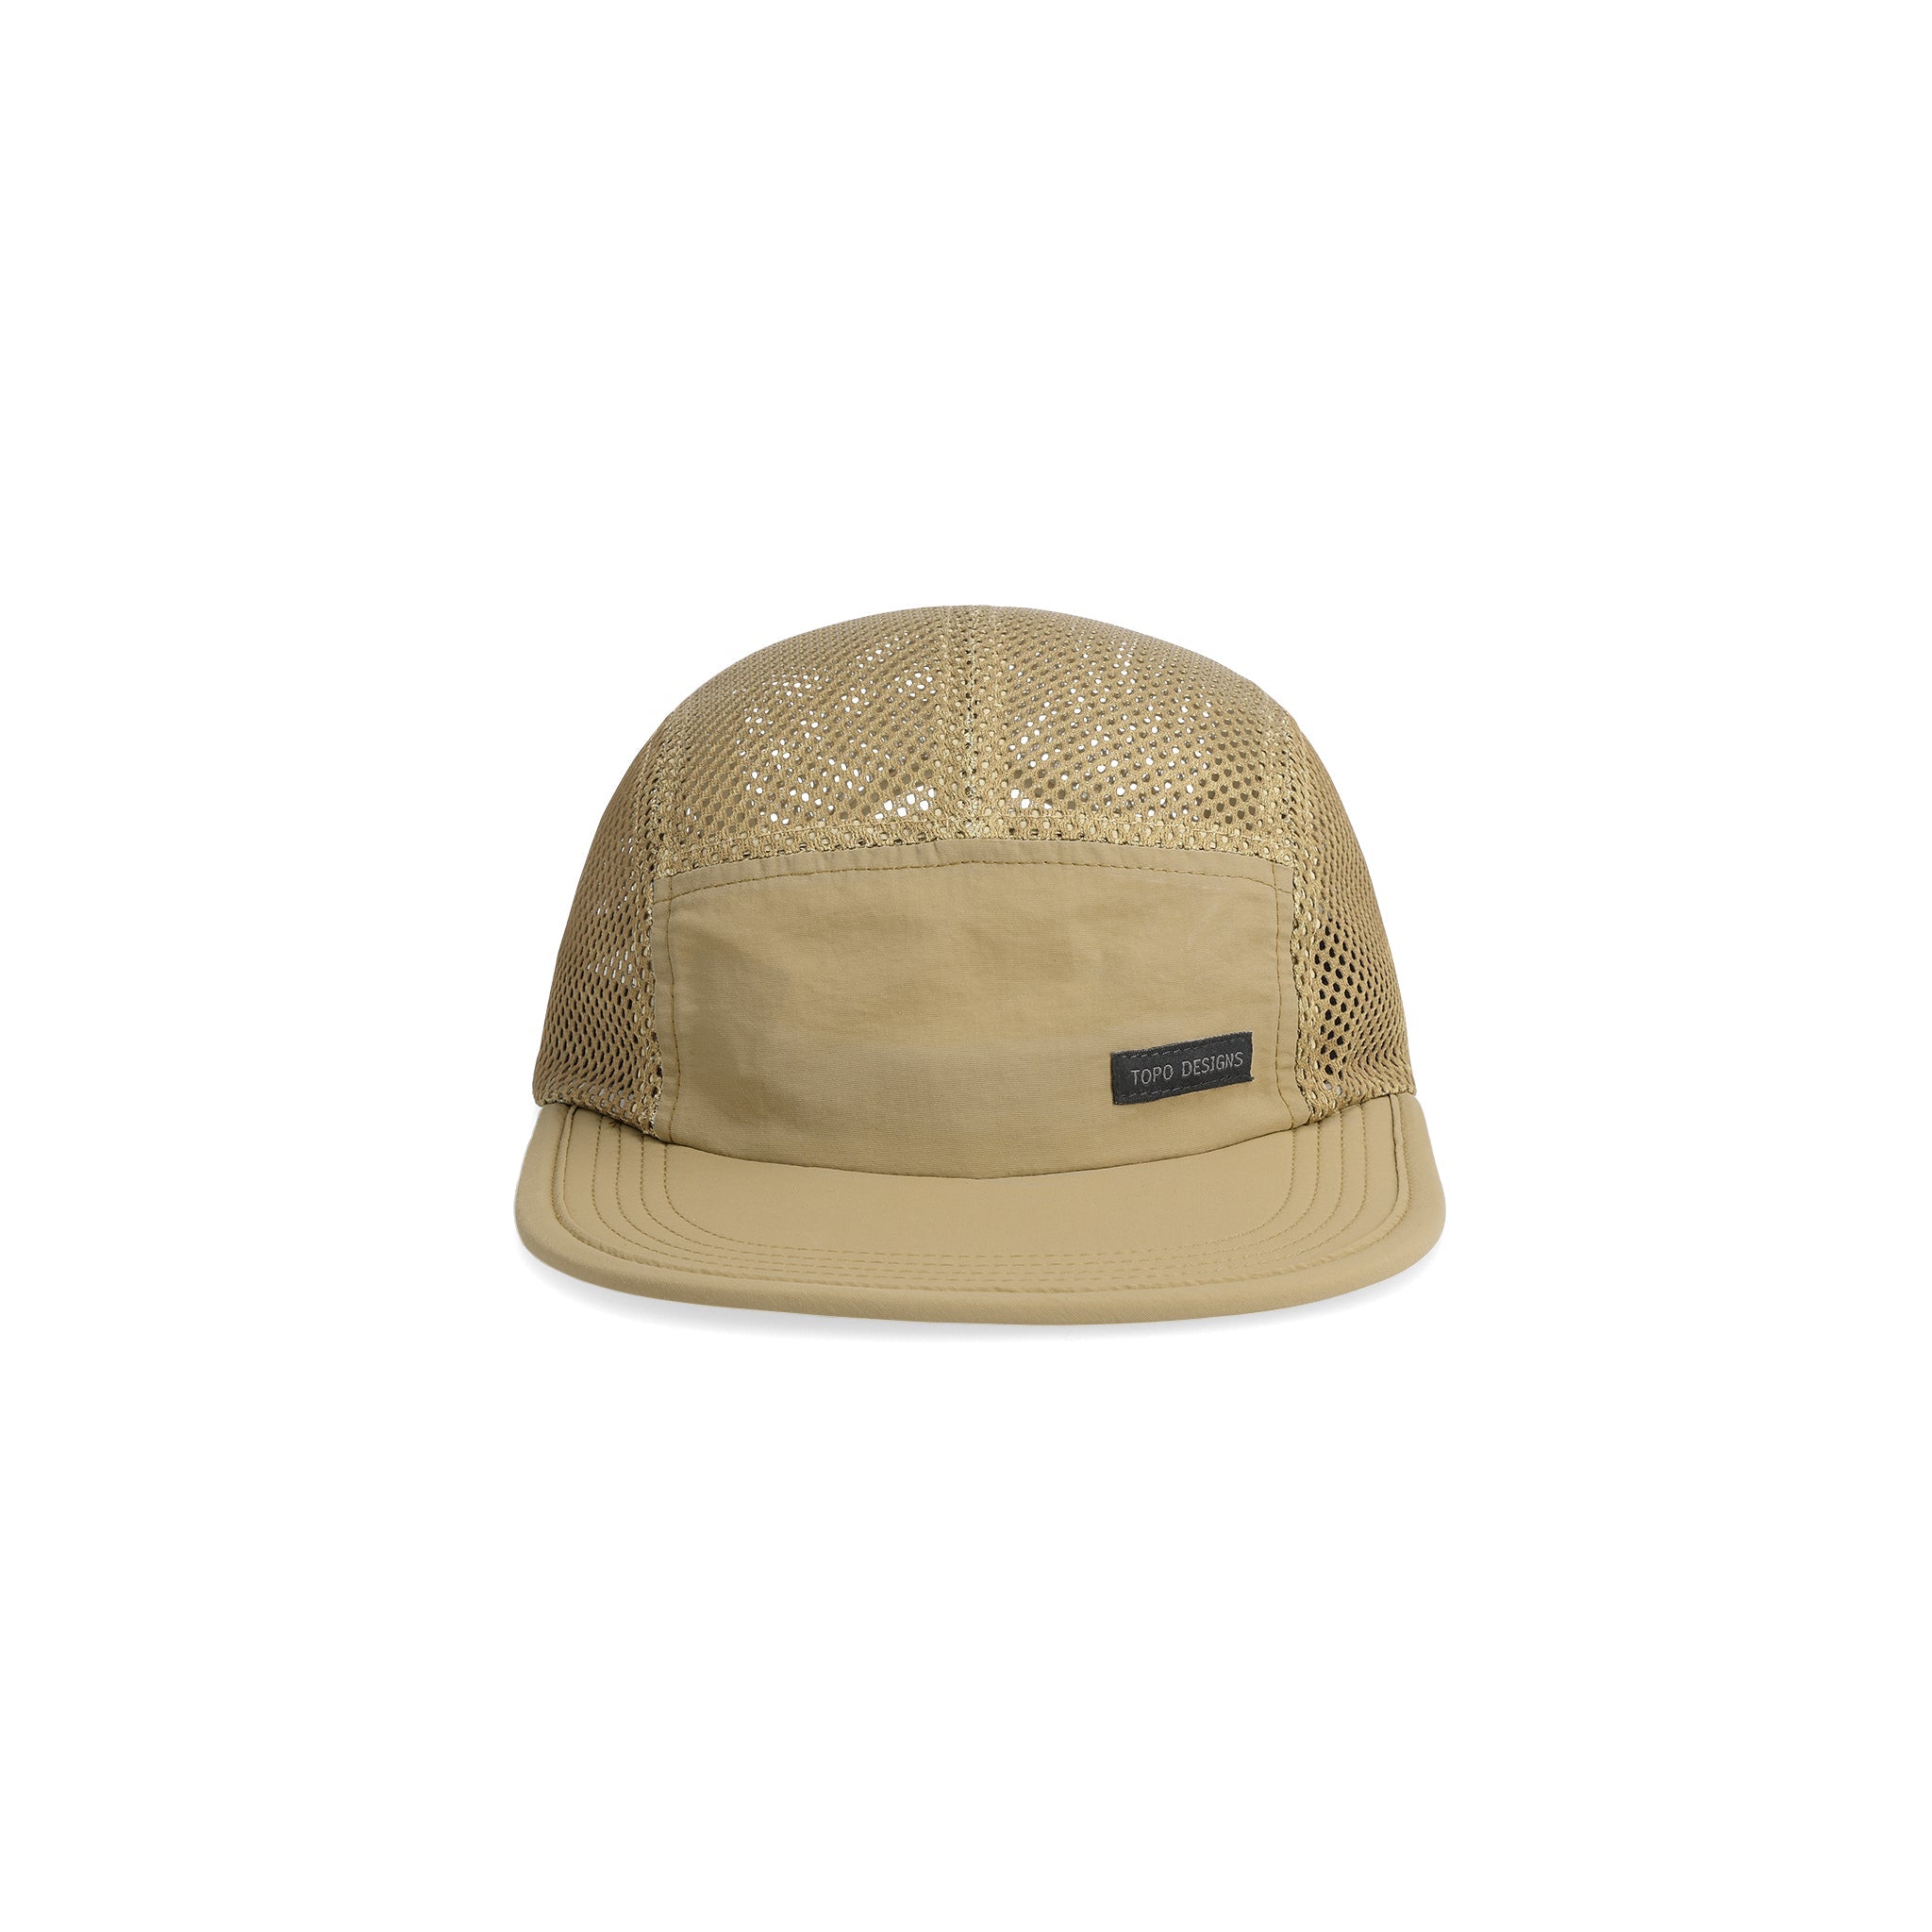 Front View of Topo Designs Global Hat in "Moss"